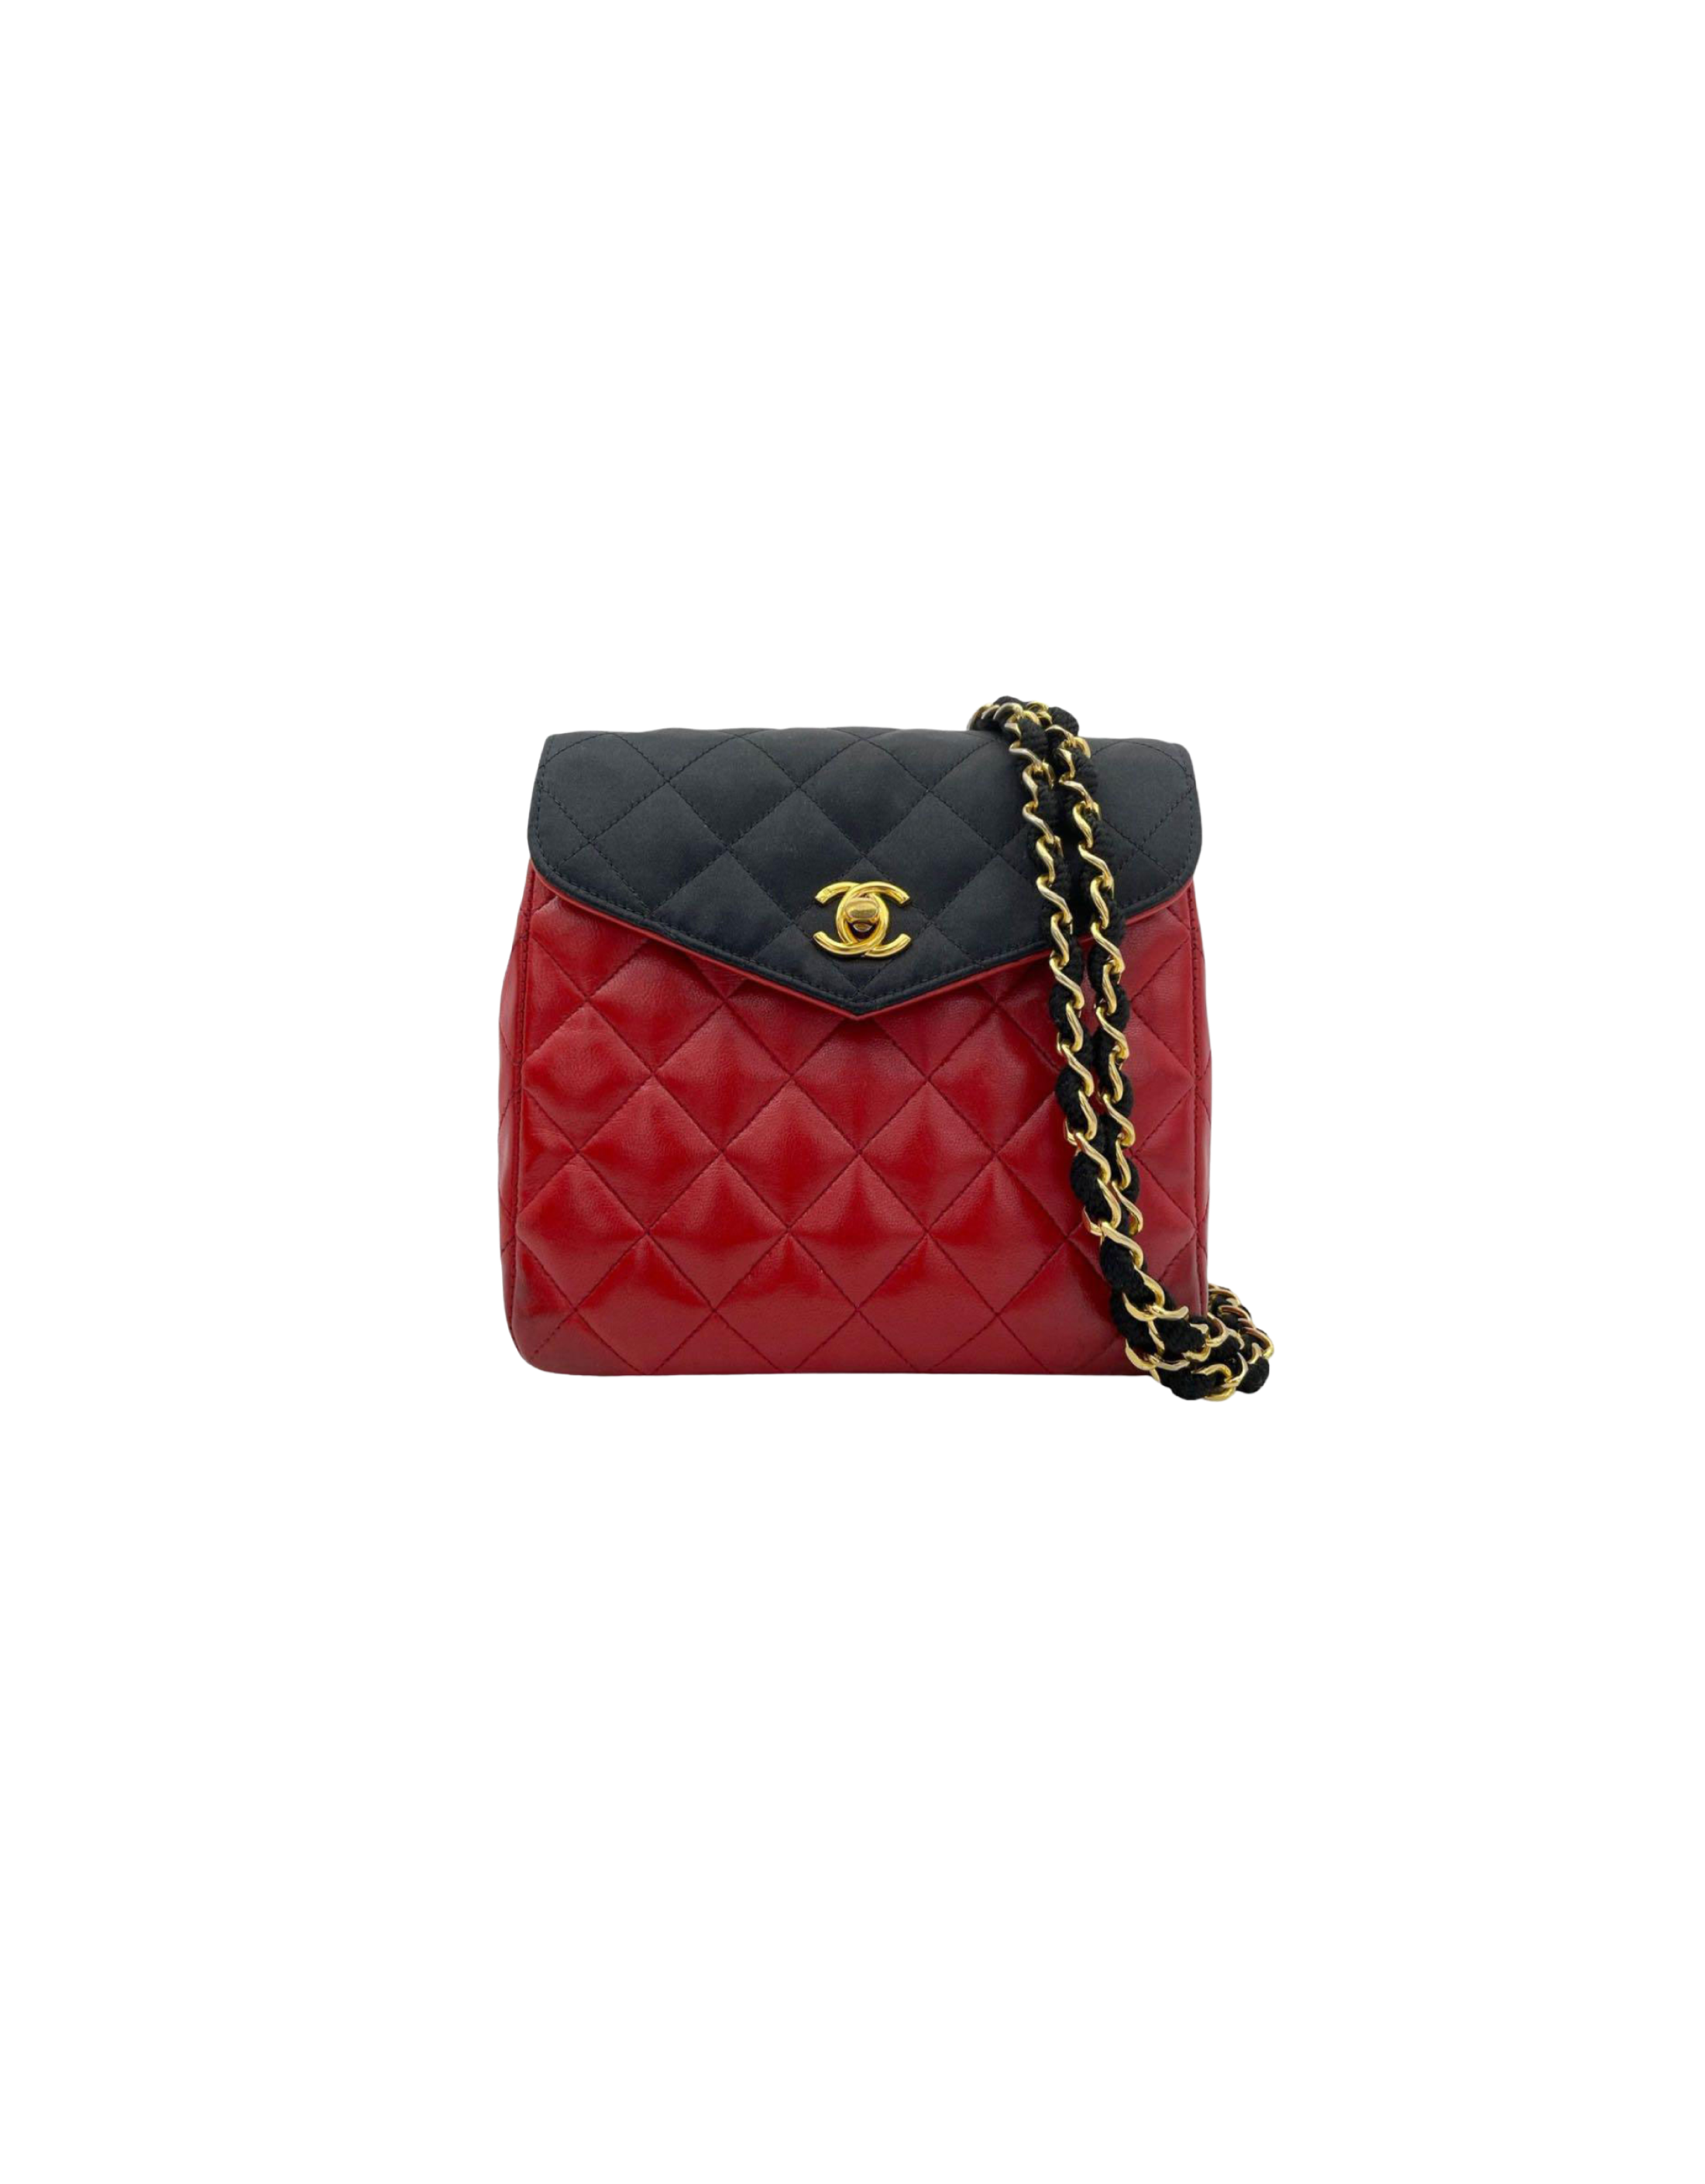 Chanel 1990s Leather and Satin Mix Quilted Shoulder Bag